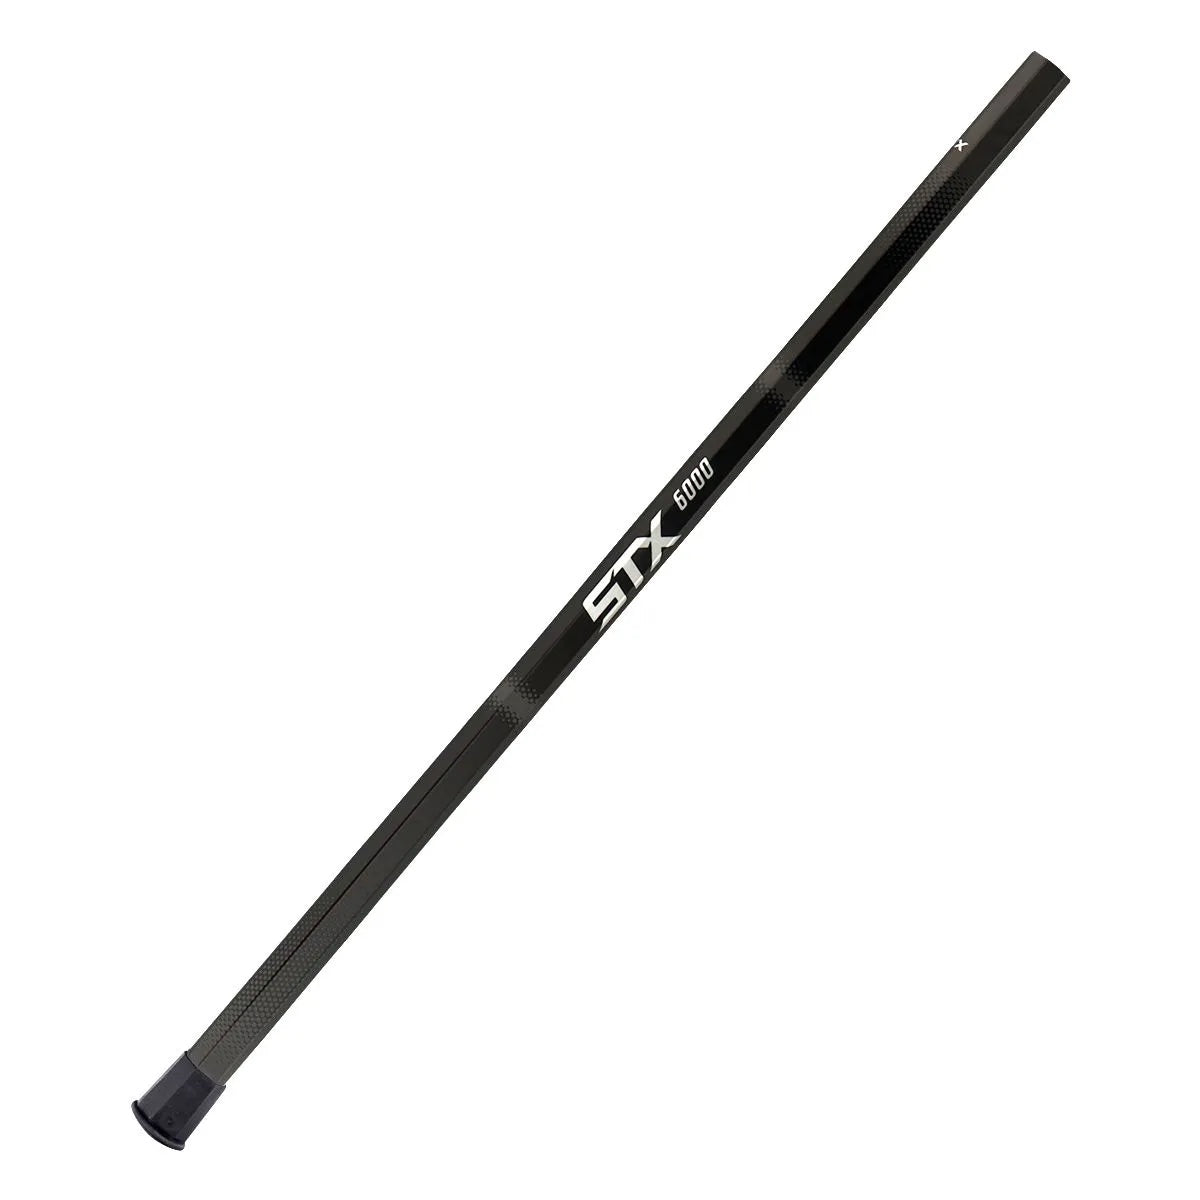 Picture of the black STX 6000 A/M Attack Lacrosse Shaft